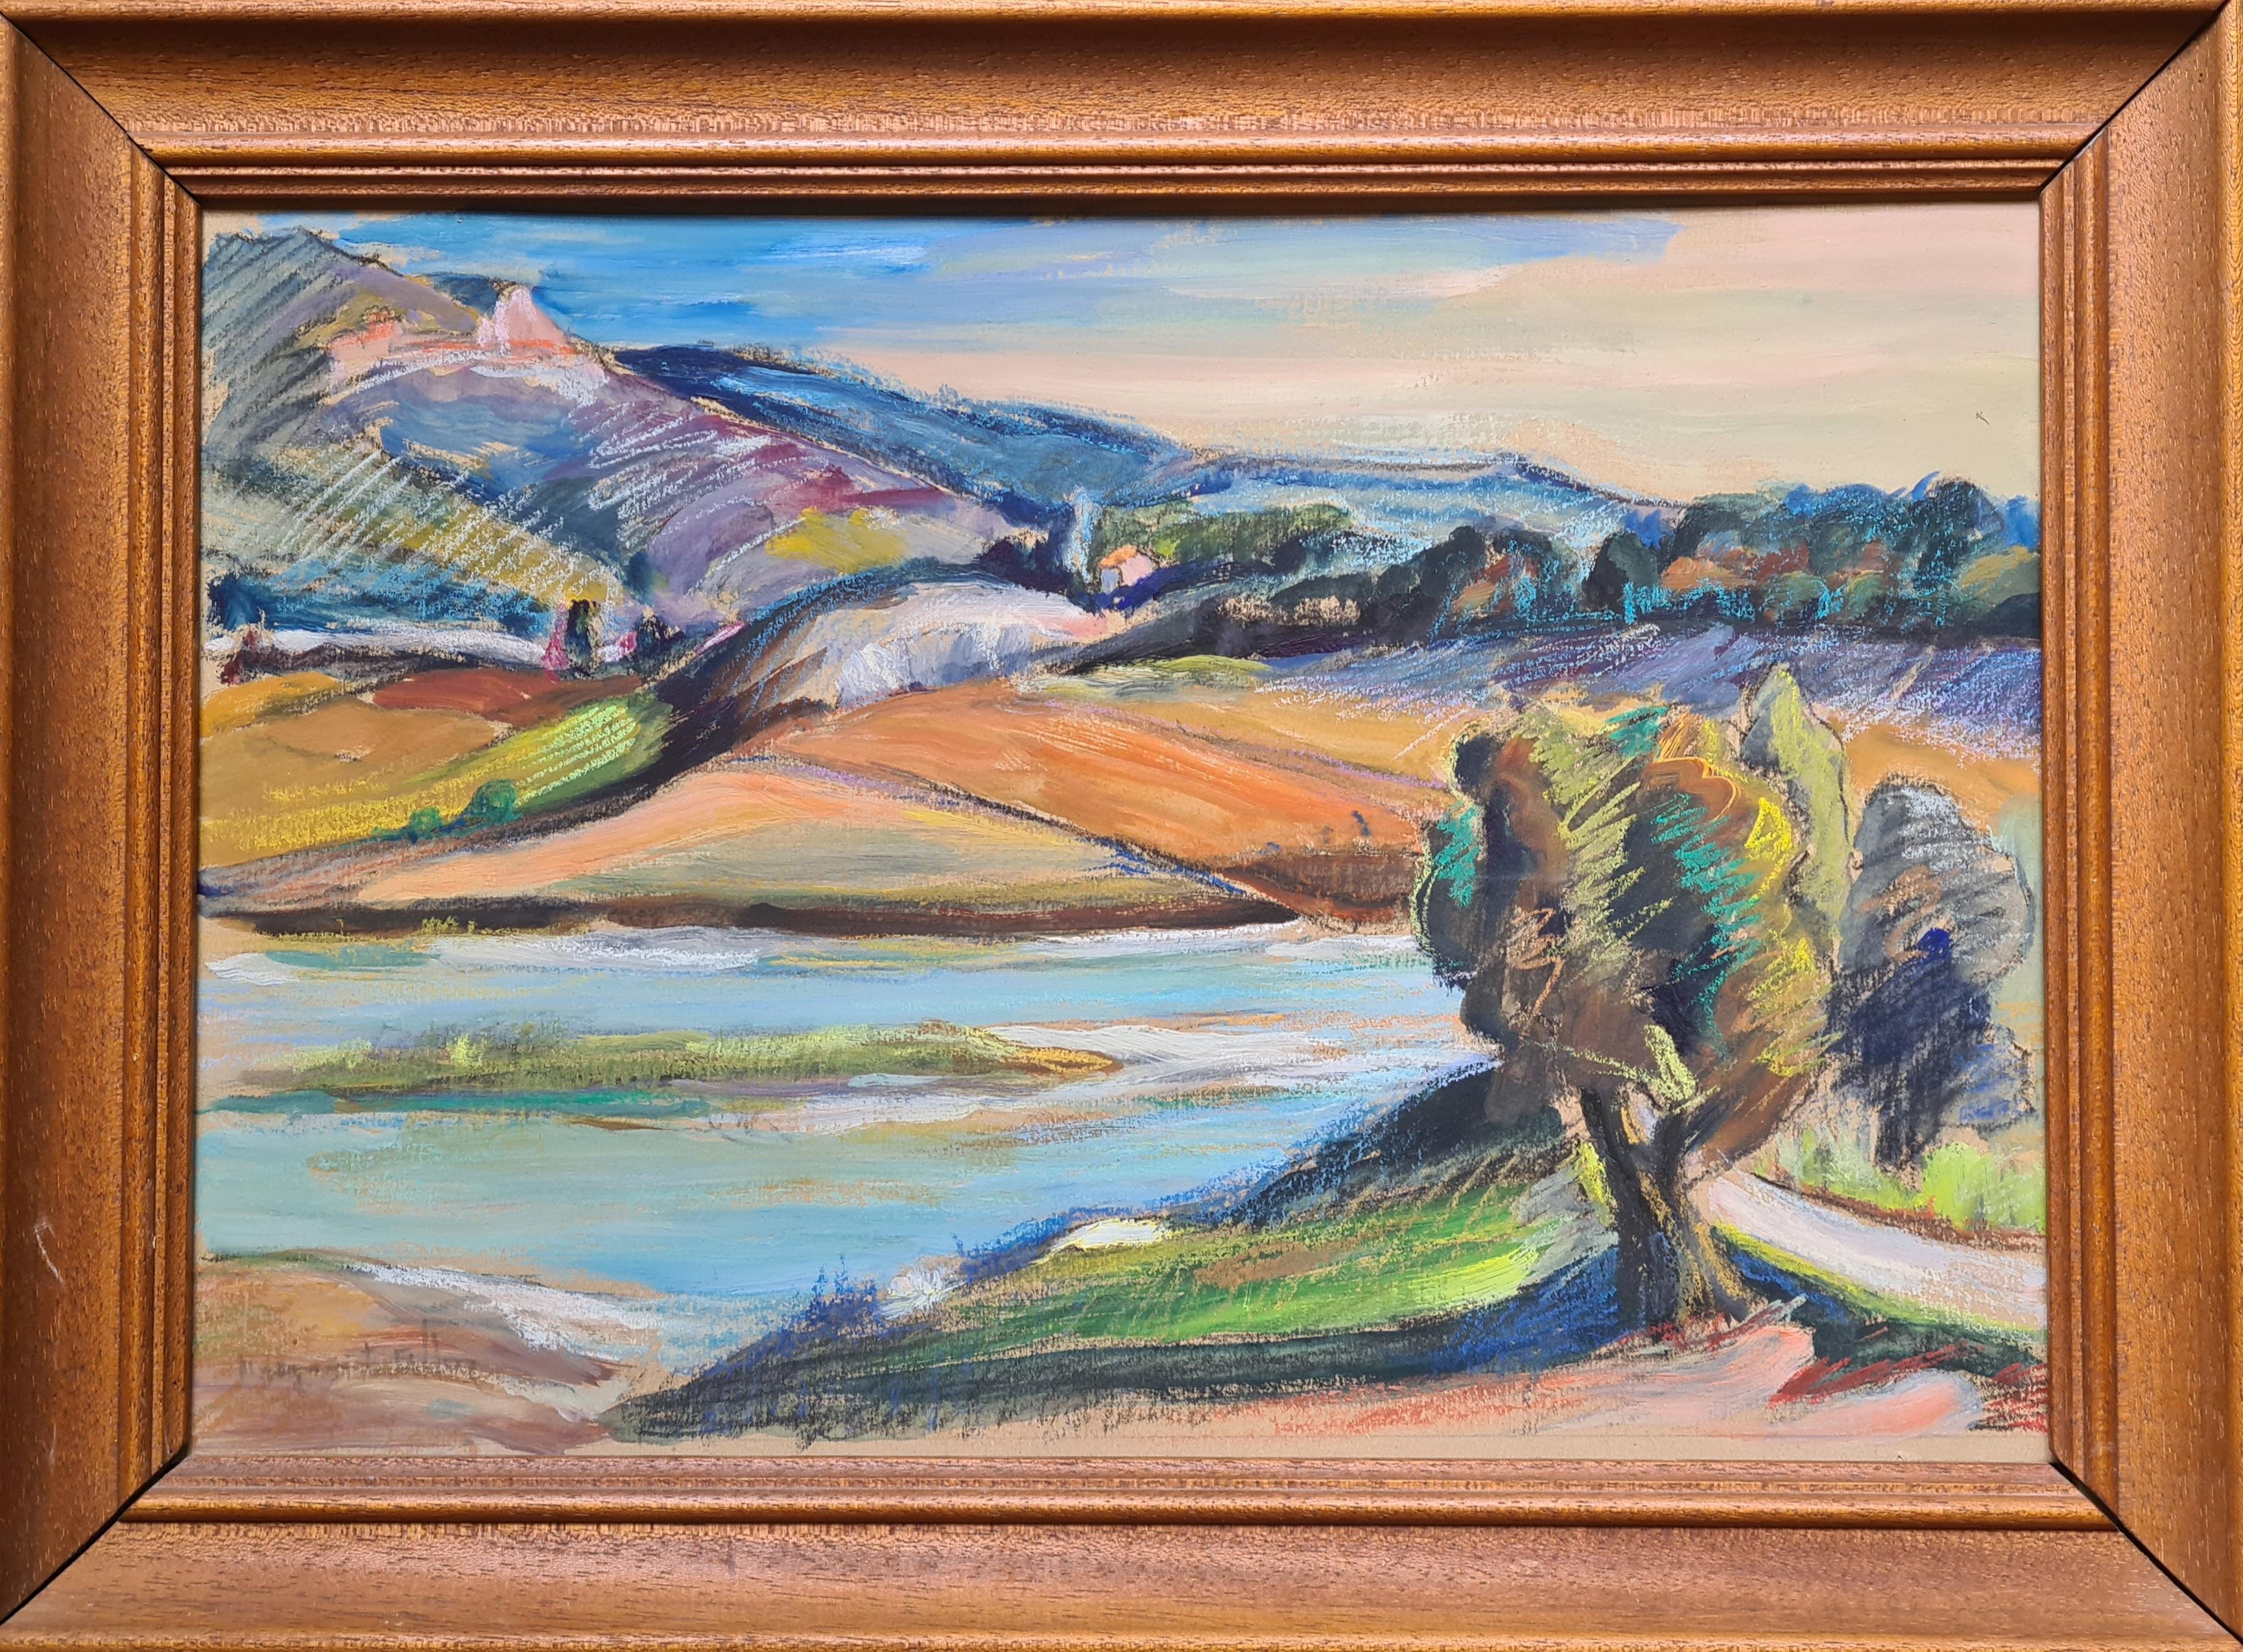 Fauvist View of A French River and Mountain Landscape, The Verdon, Provence. - Art by Marguerite Allar